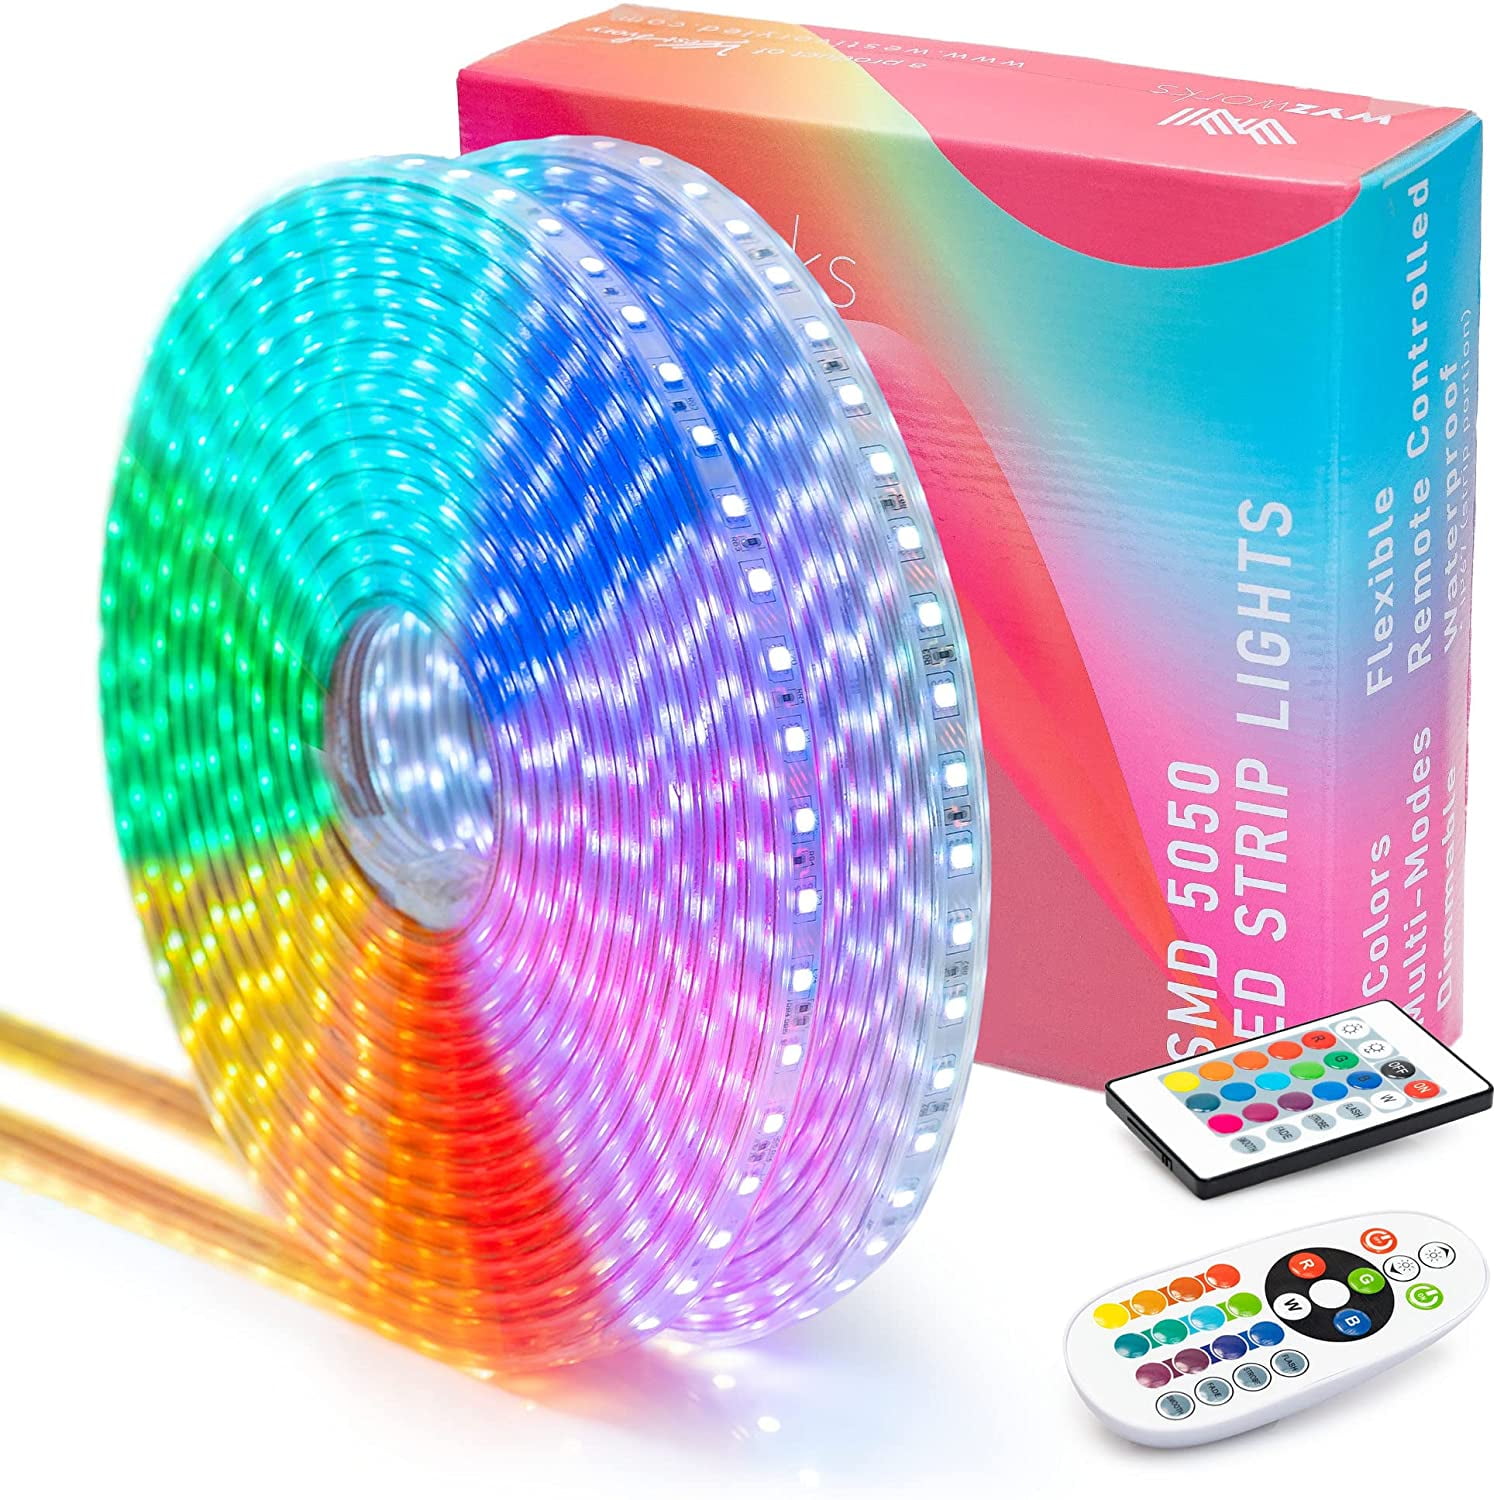 16.4 Feet Flat Flexible LED Rope Lights Color Changing RGB Strip Light with 8 